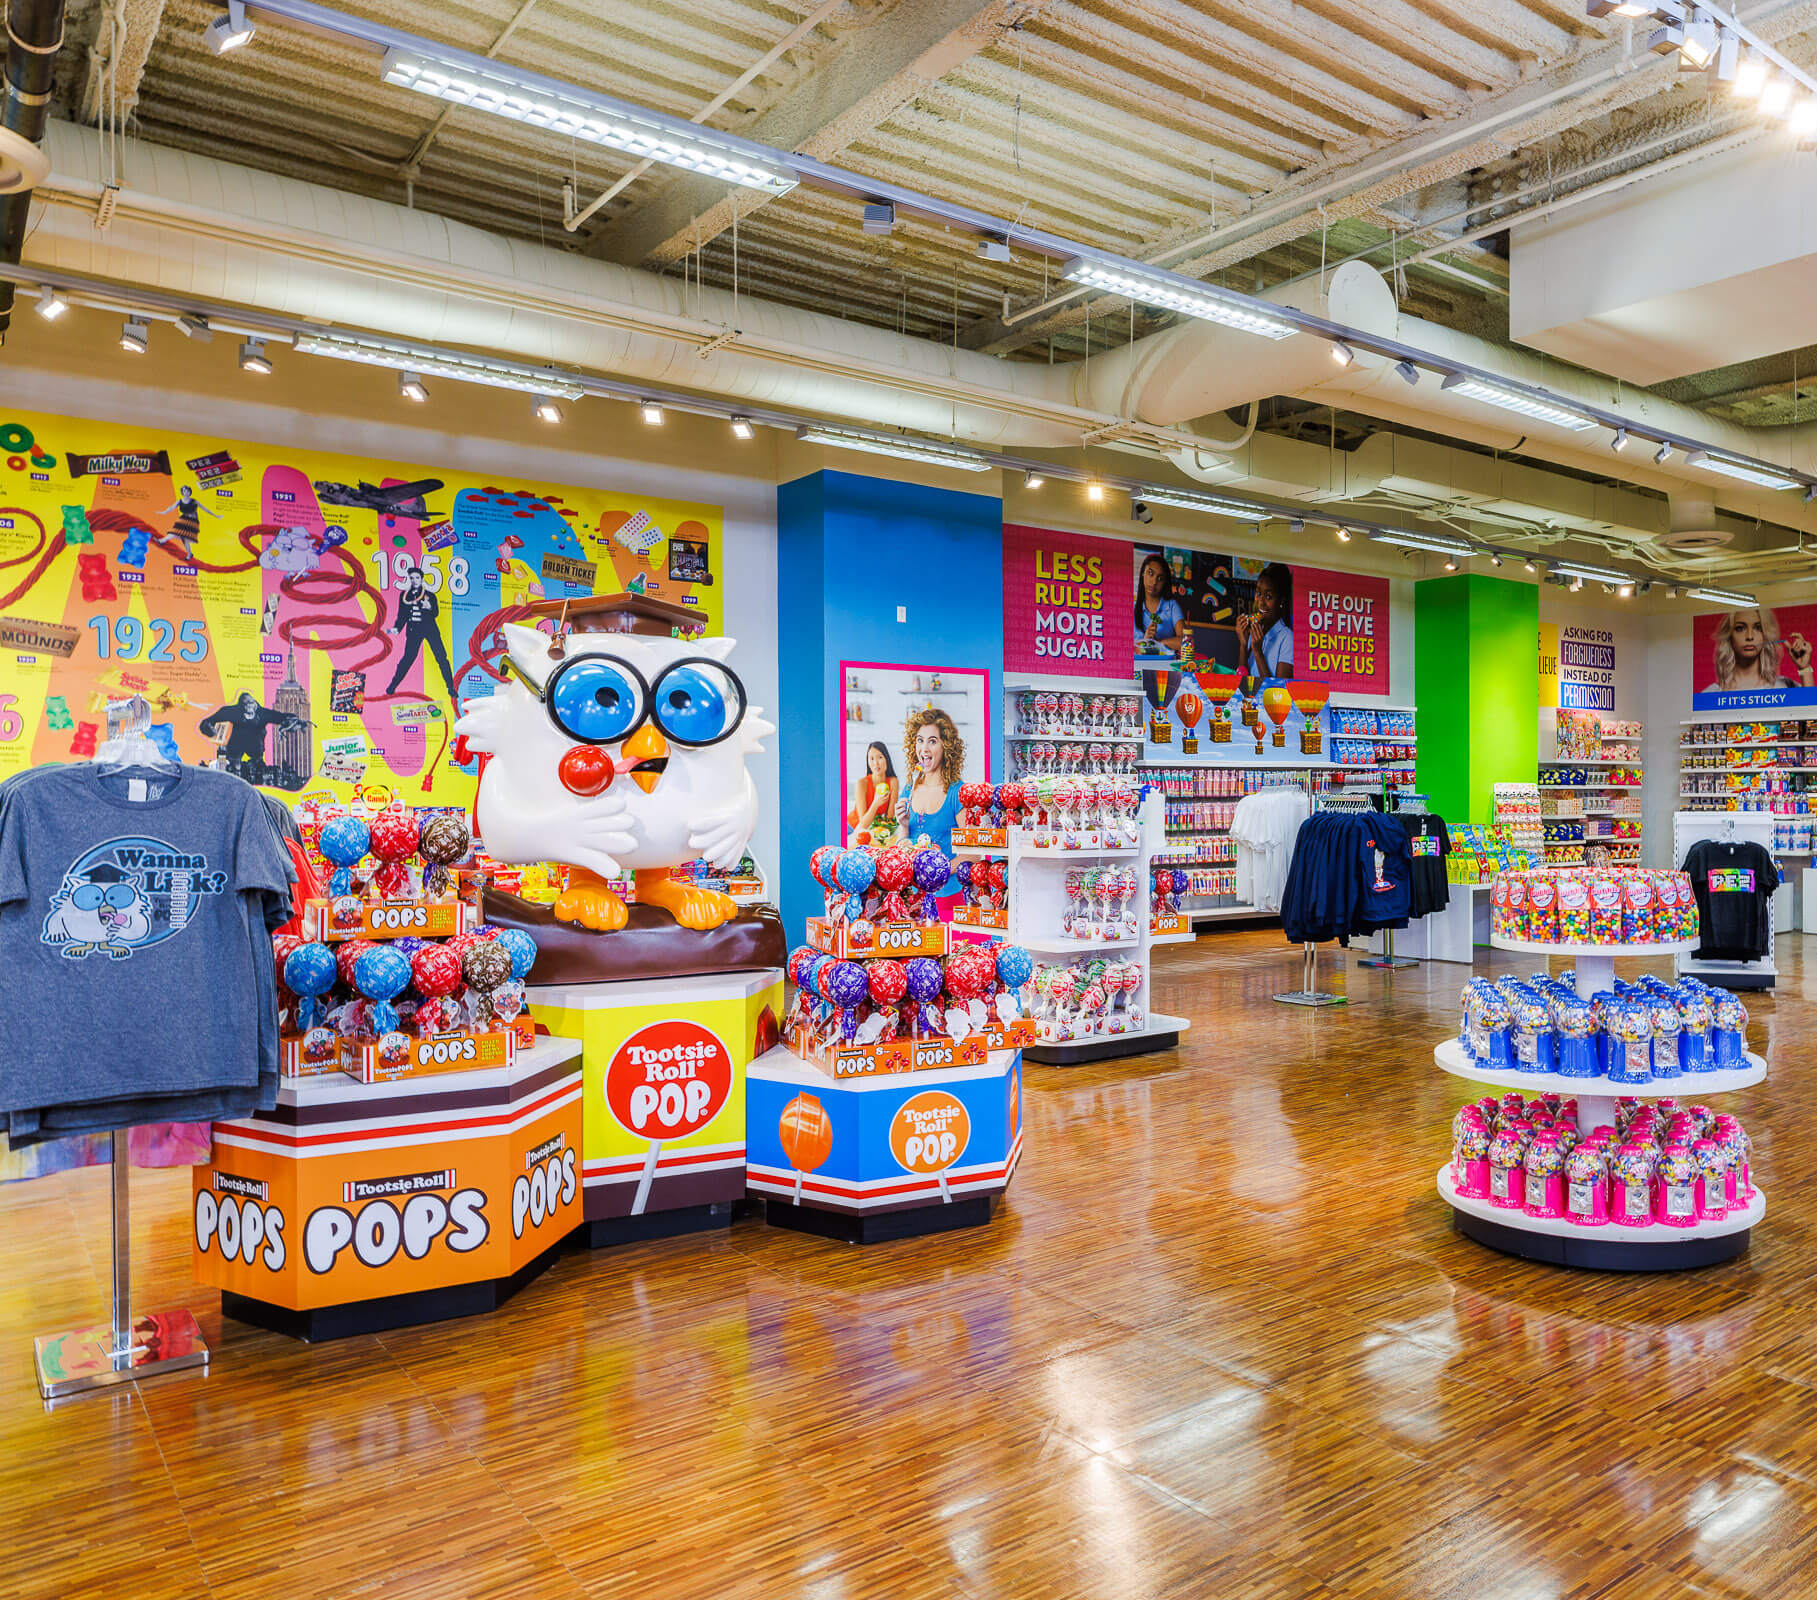 IT'SUGAR to open world's largest non-producing candy store at New